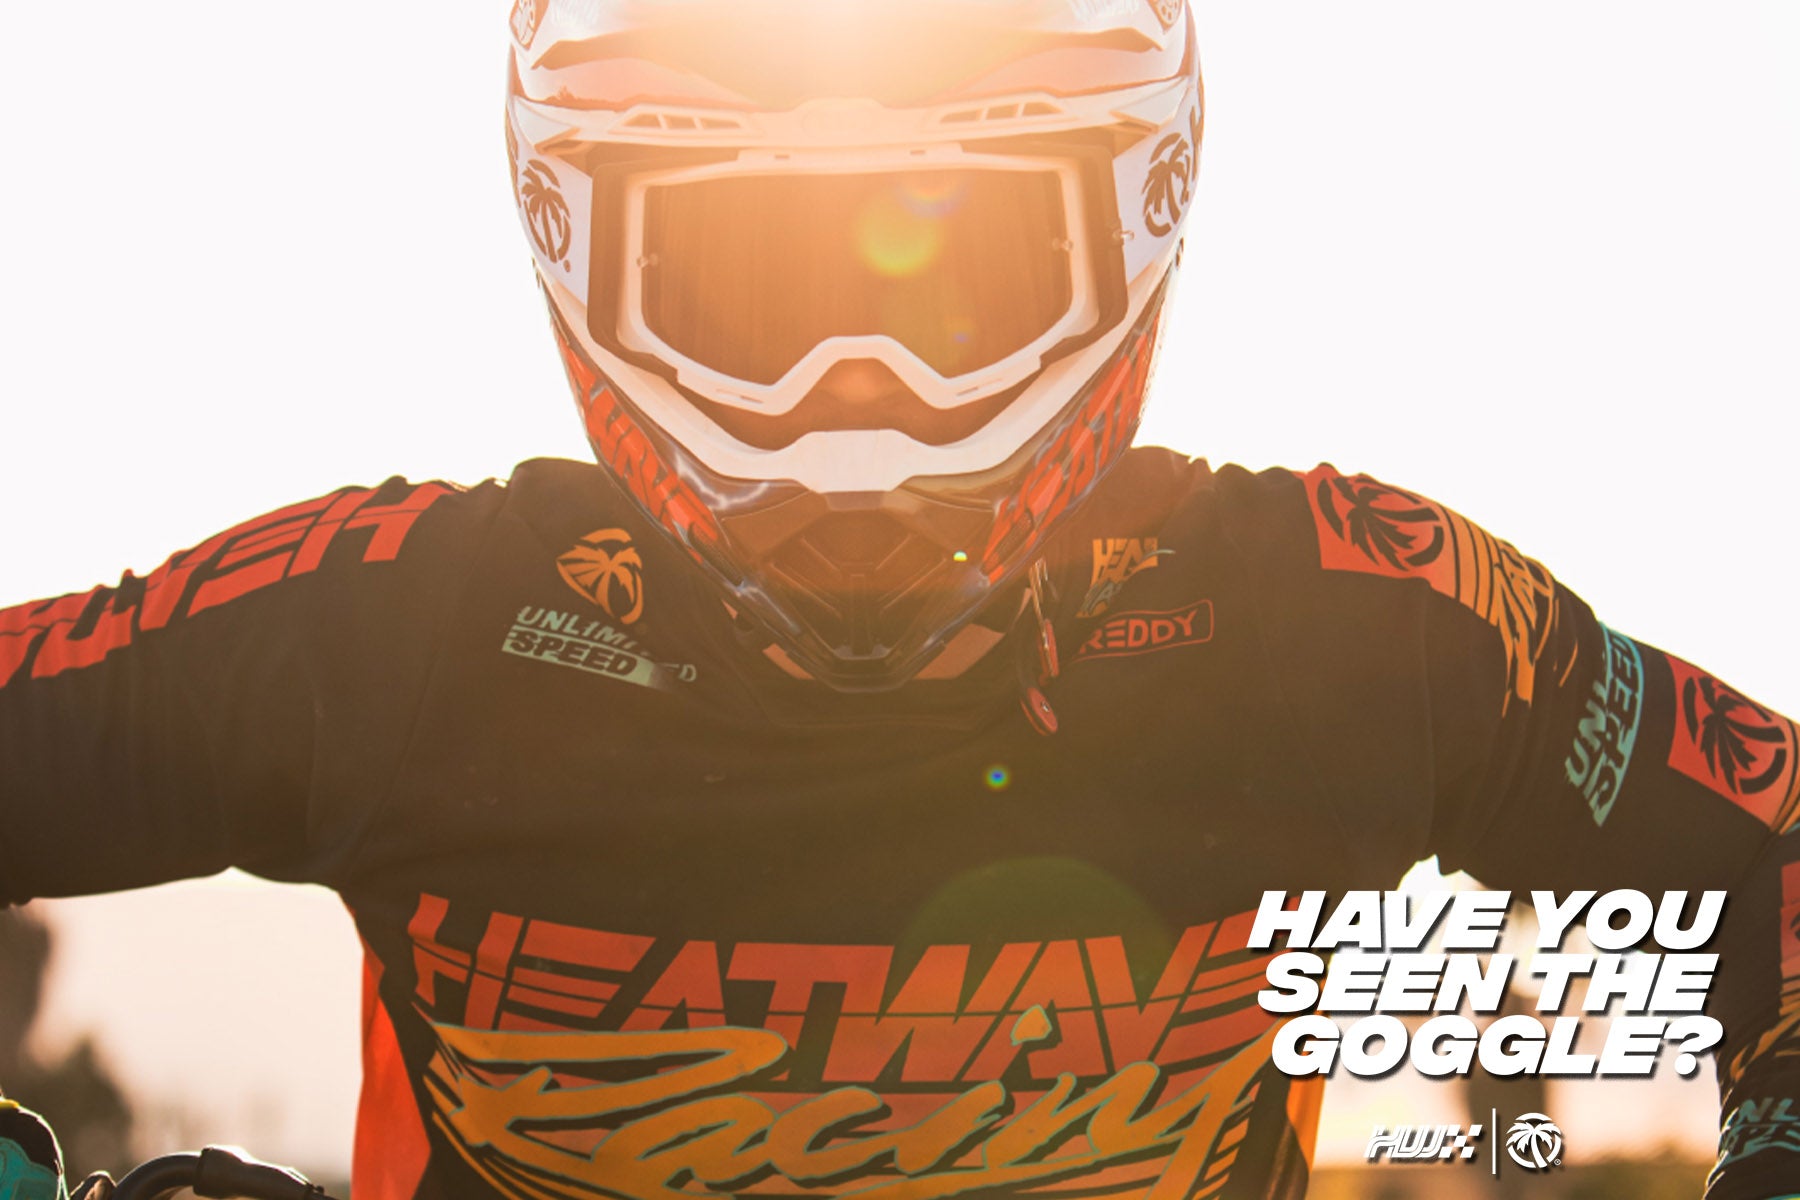 Heat Wave Visual Australia MXG-250 Moto Goggle has arrived. Shop online for Free Same Day Shipping Australia Wide. MX Goggle. Moto Goggle. Motolife.